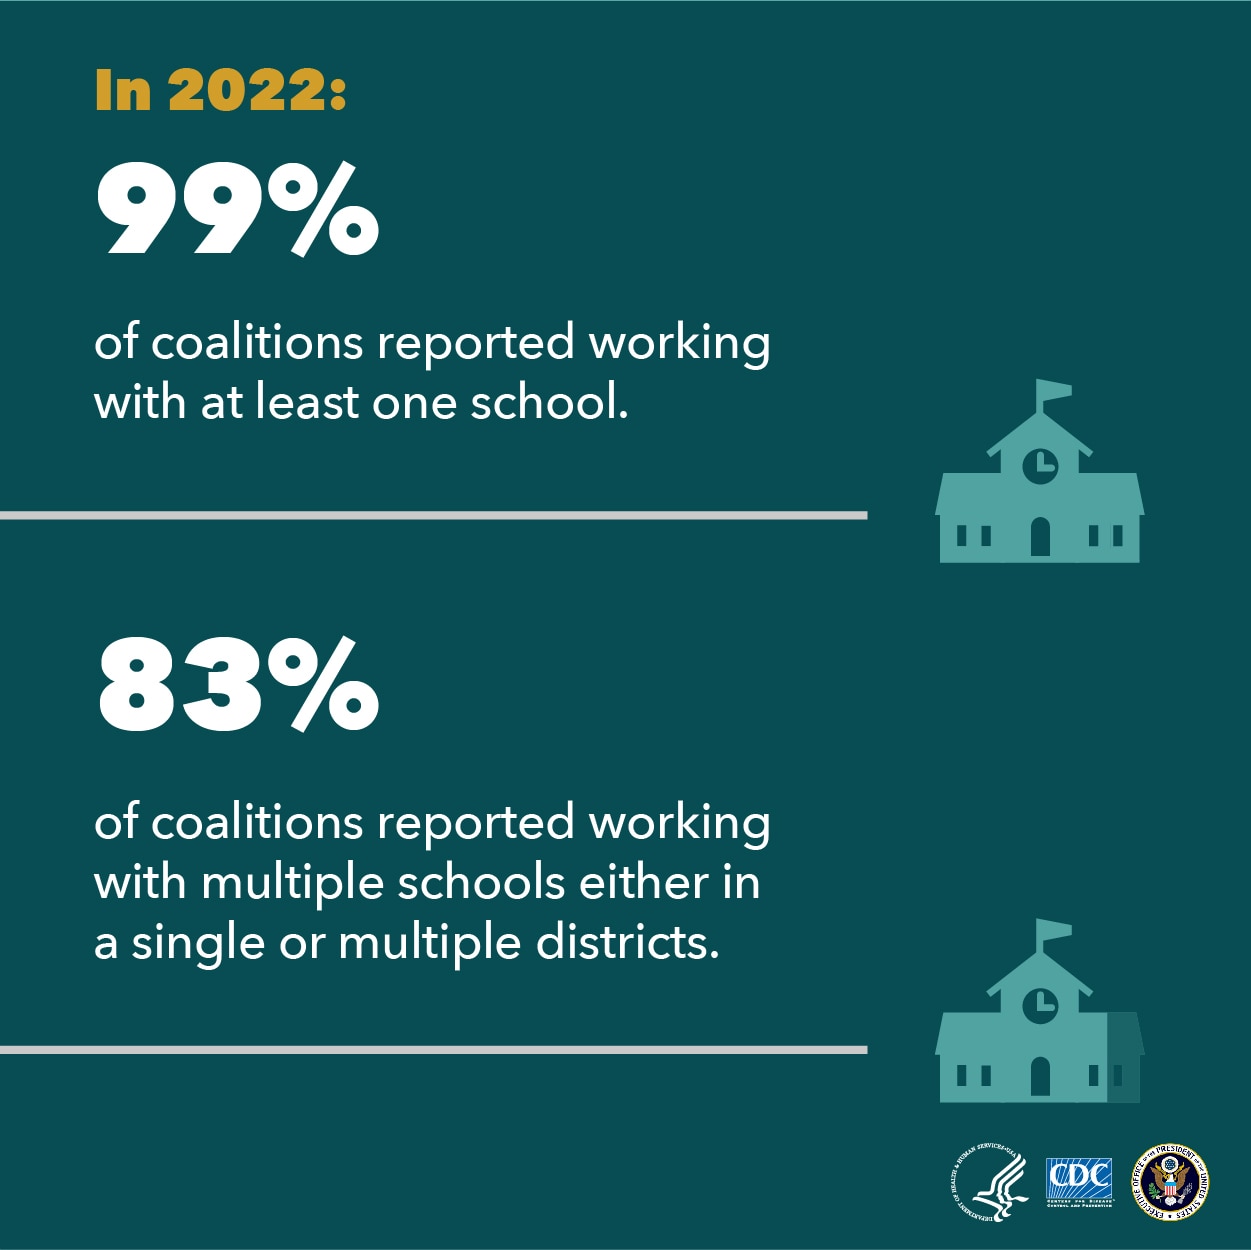 In 2022: 99% of coalitions reported working with at least one school. 83% of coalitions reported working with multiple schools either in a single or multiple districts.